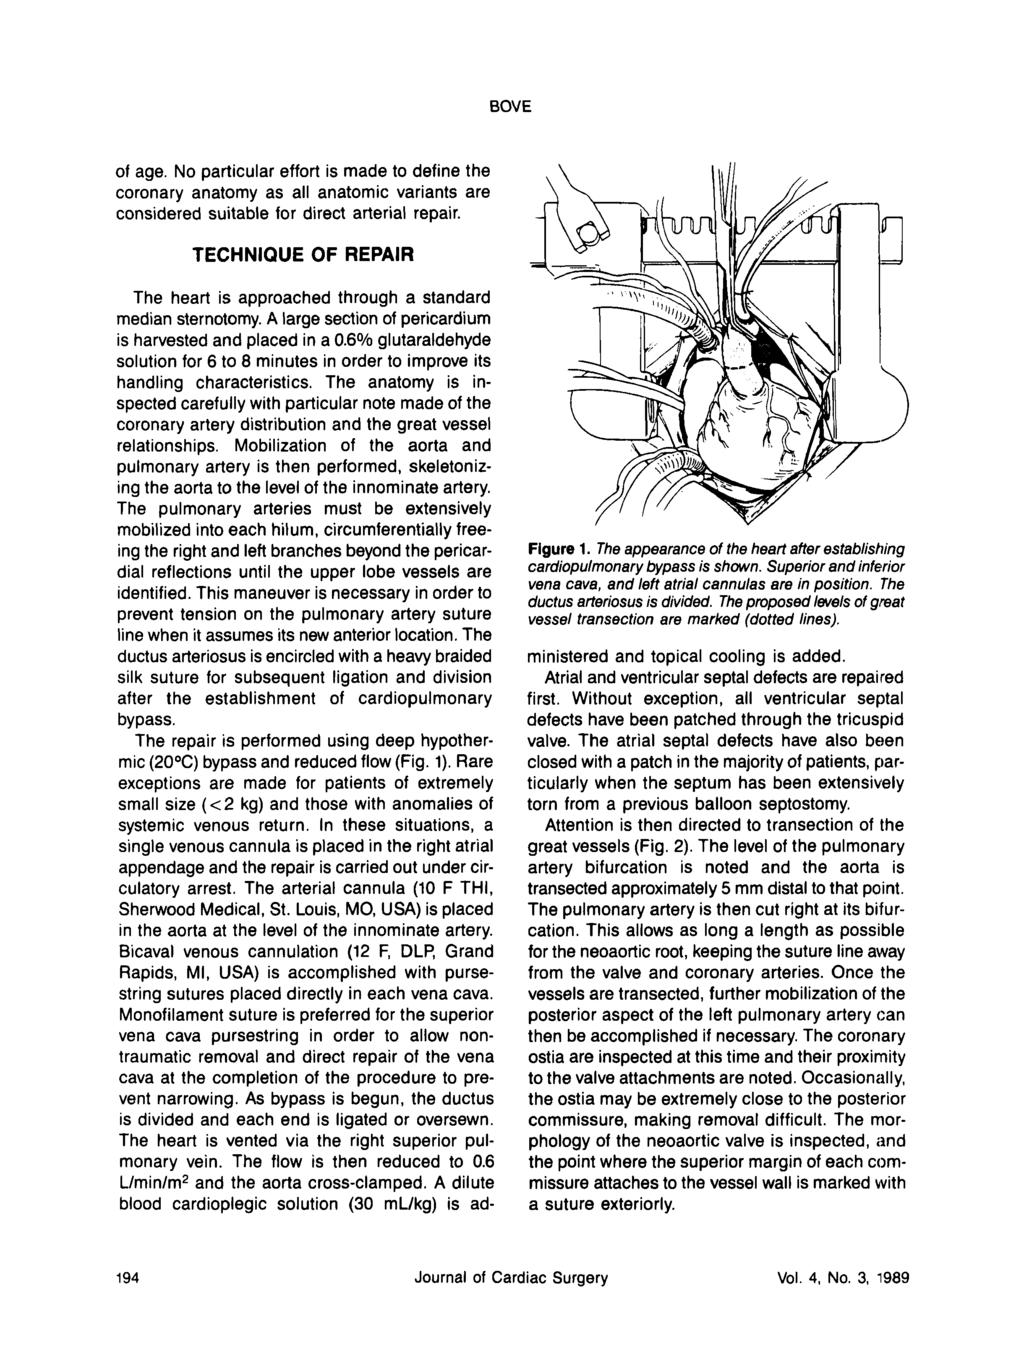 BOVE of age. No particular effort is made to define the coronary anatomy as all anatomic variants are considered suitable for direct arterial repair.